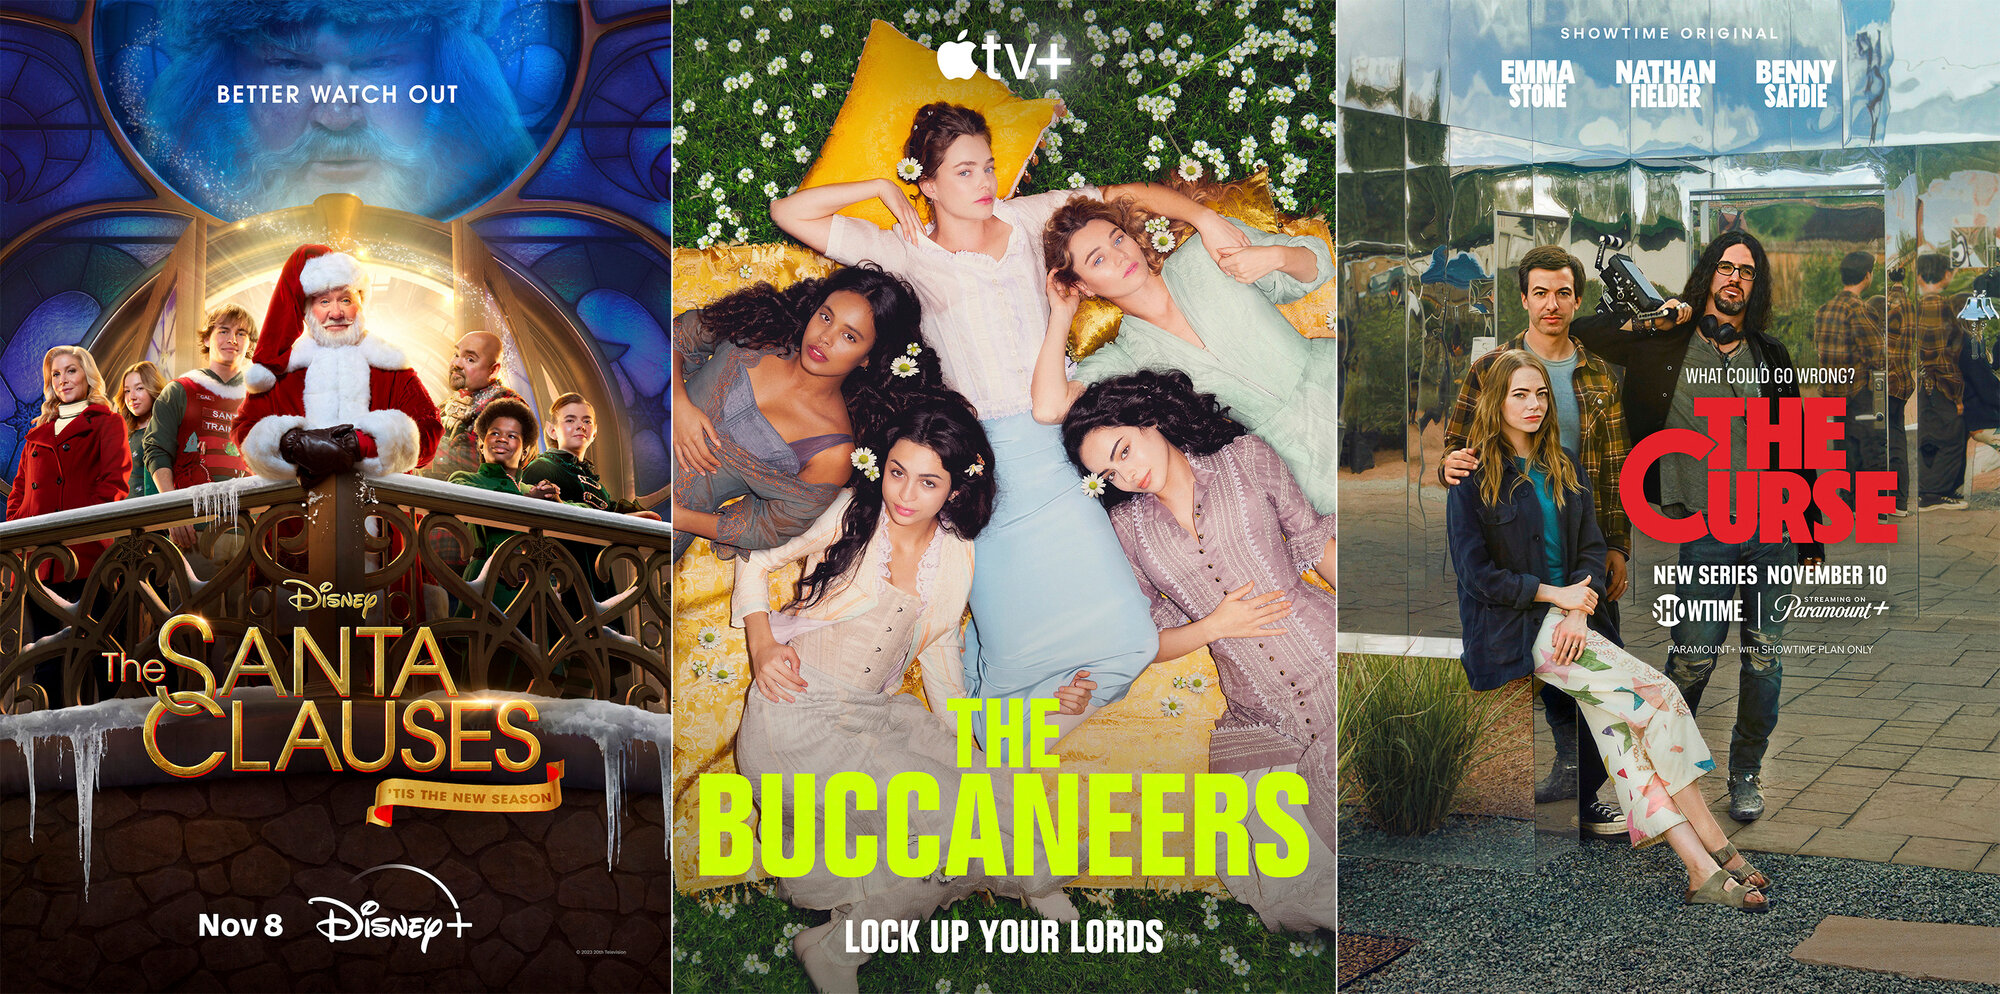 This combination of images shows, from left, promotional art for the second season of "The Santa Clauses," the eight-episode series "The Buccaneers" and the new series "The Curse," starring Emma Stone.